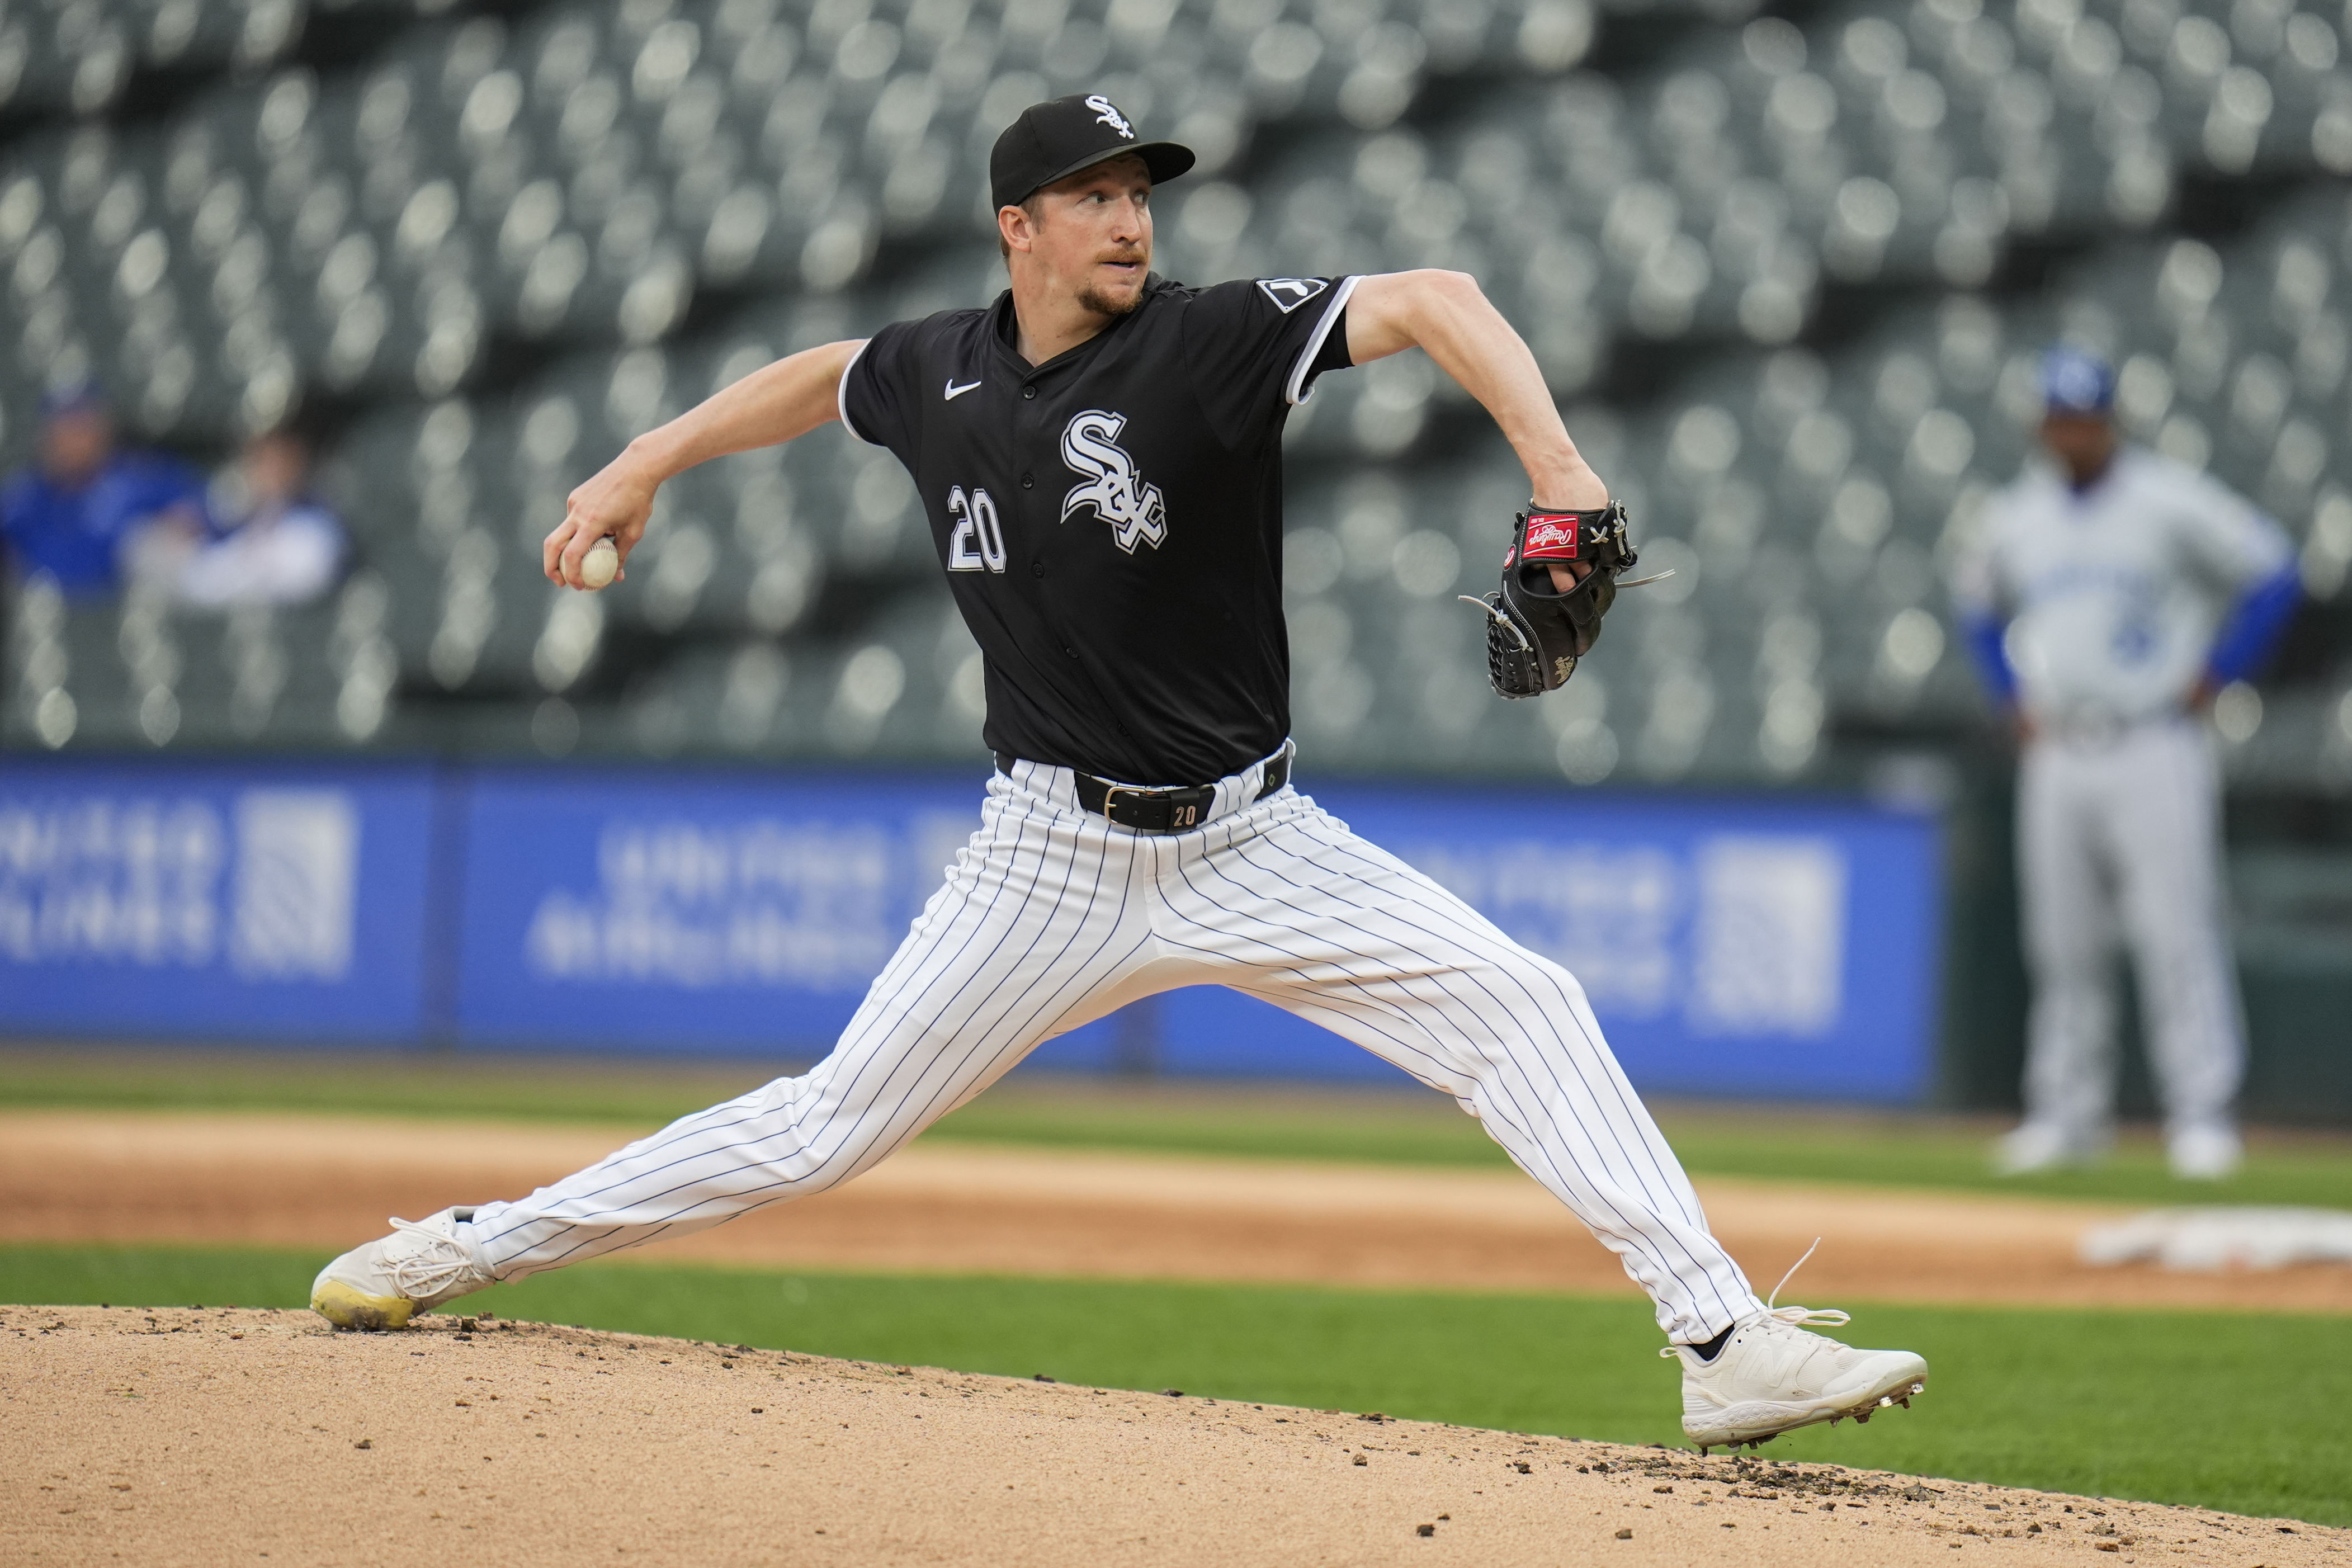 sheets and fedde lead white sox over royals 2-1 to stop 6-game skid with doubleheader split